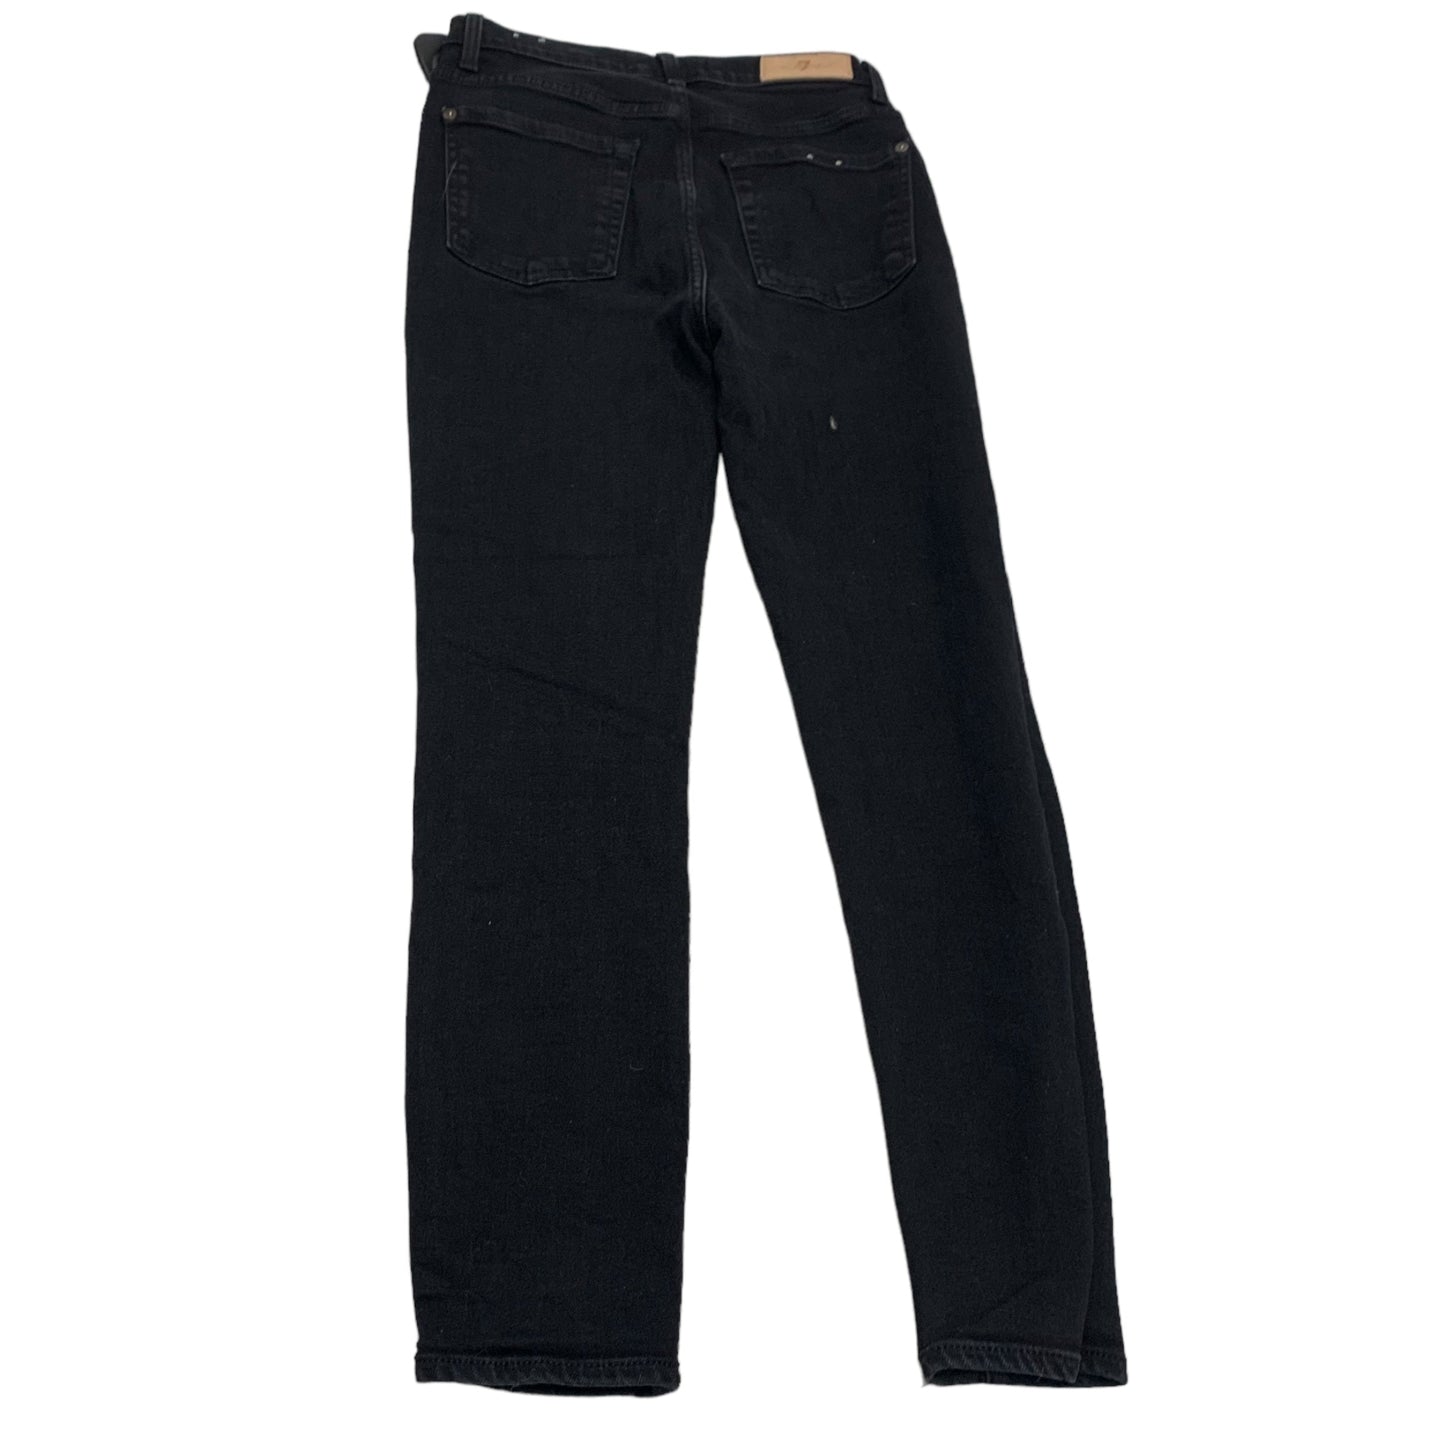 Pants Designer By 7 For All Mankind  Size: 4